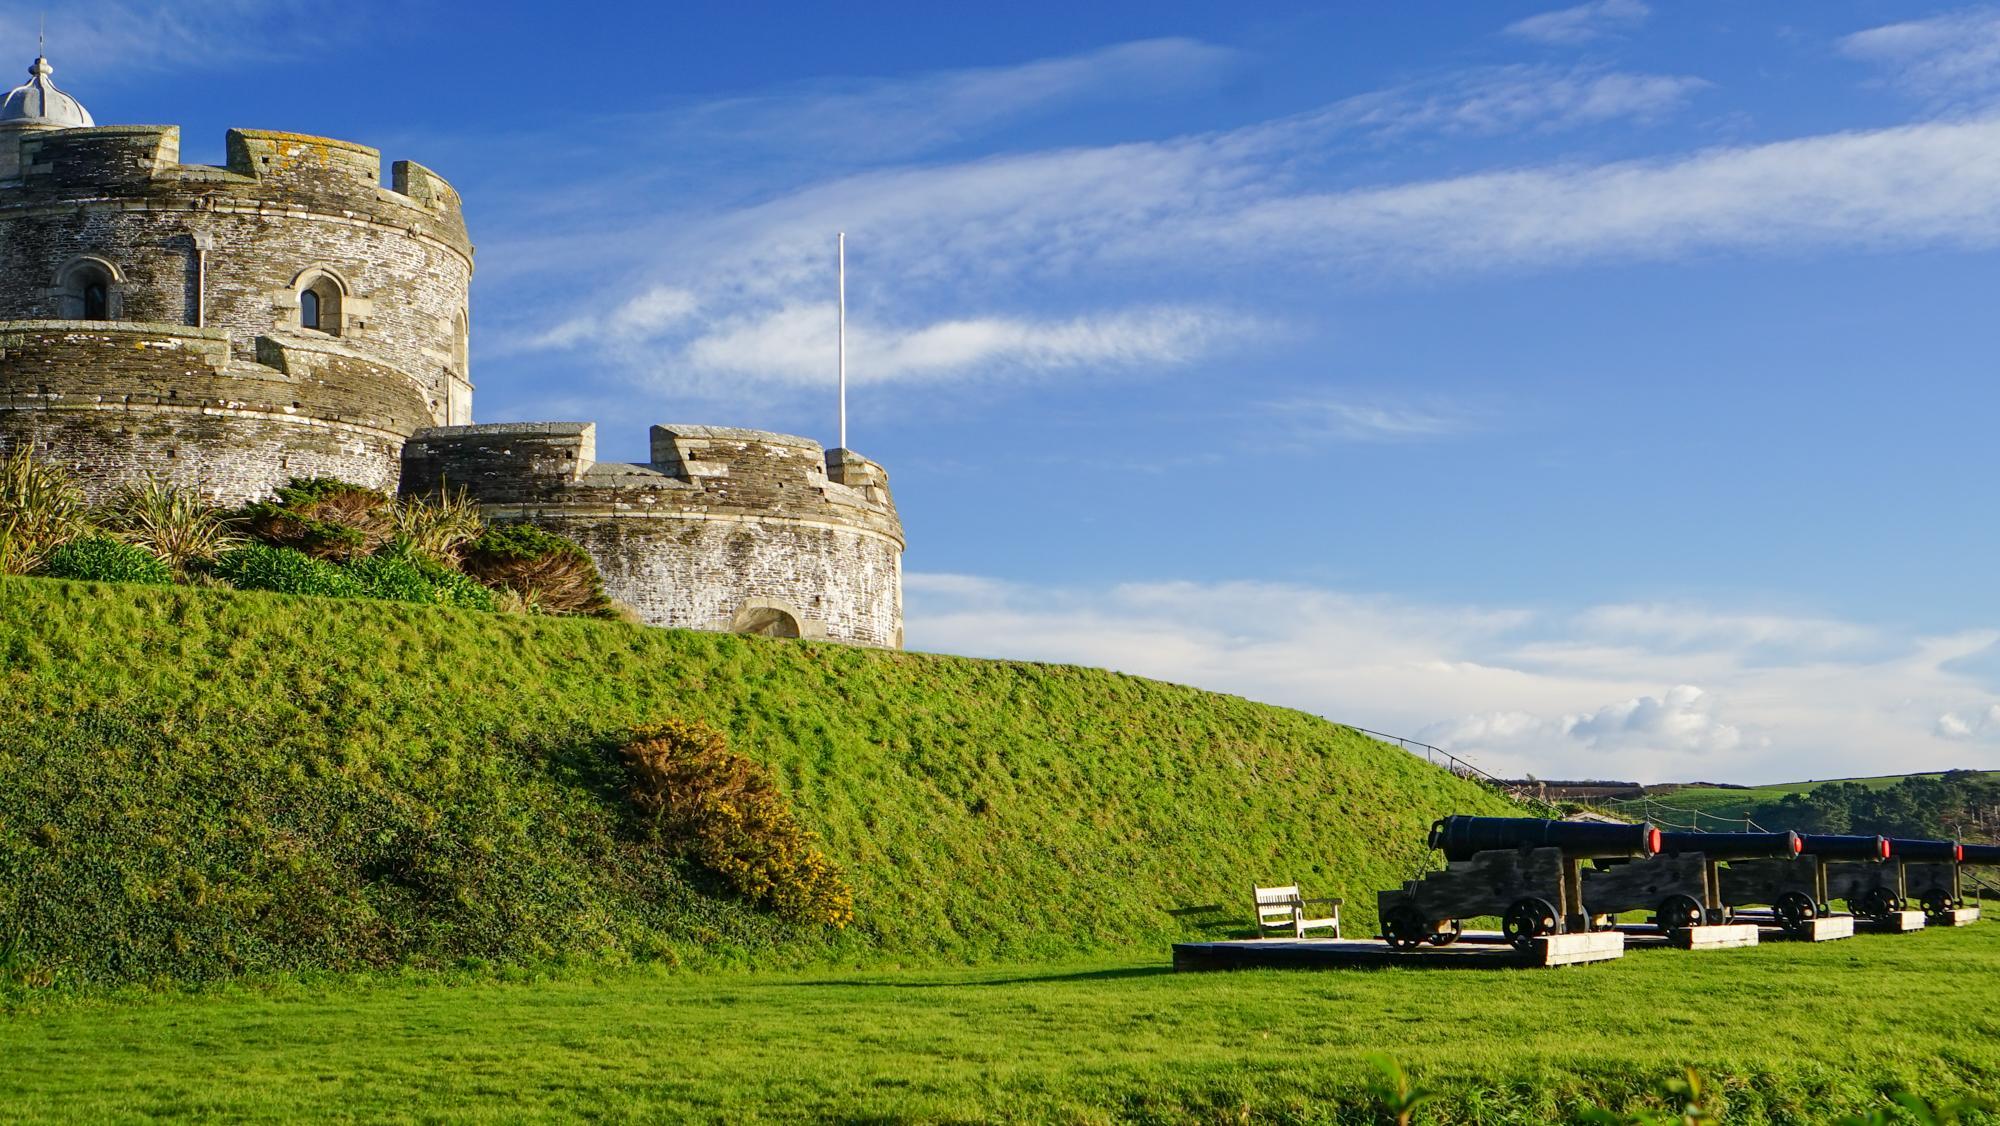 St Mawes Castle defending Cornwall with canons on the lawn